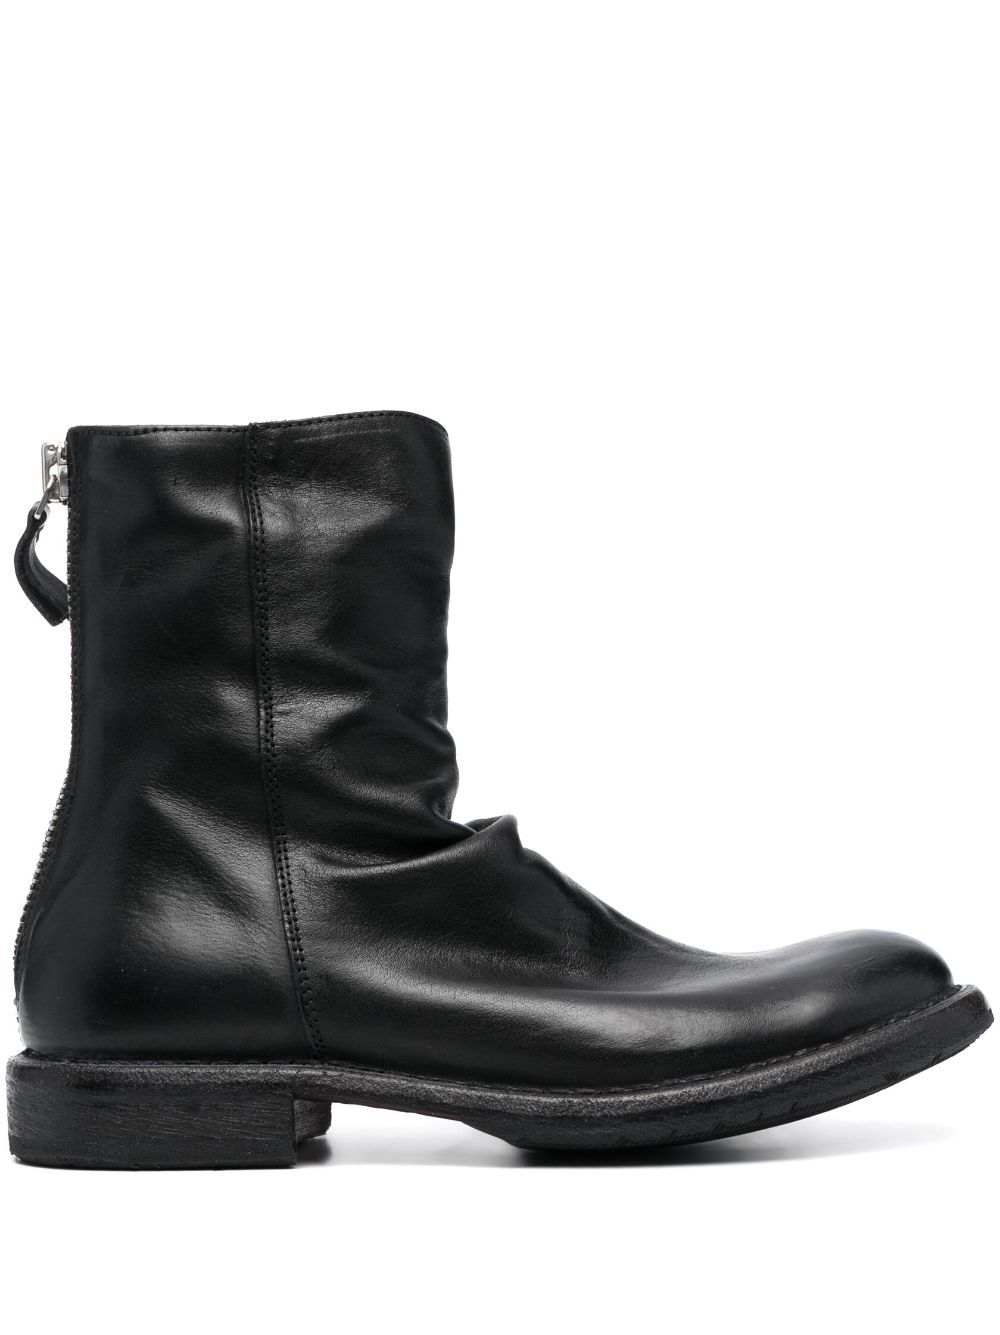 Moma Tronchetto leather ankle boots - Black von Moma